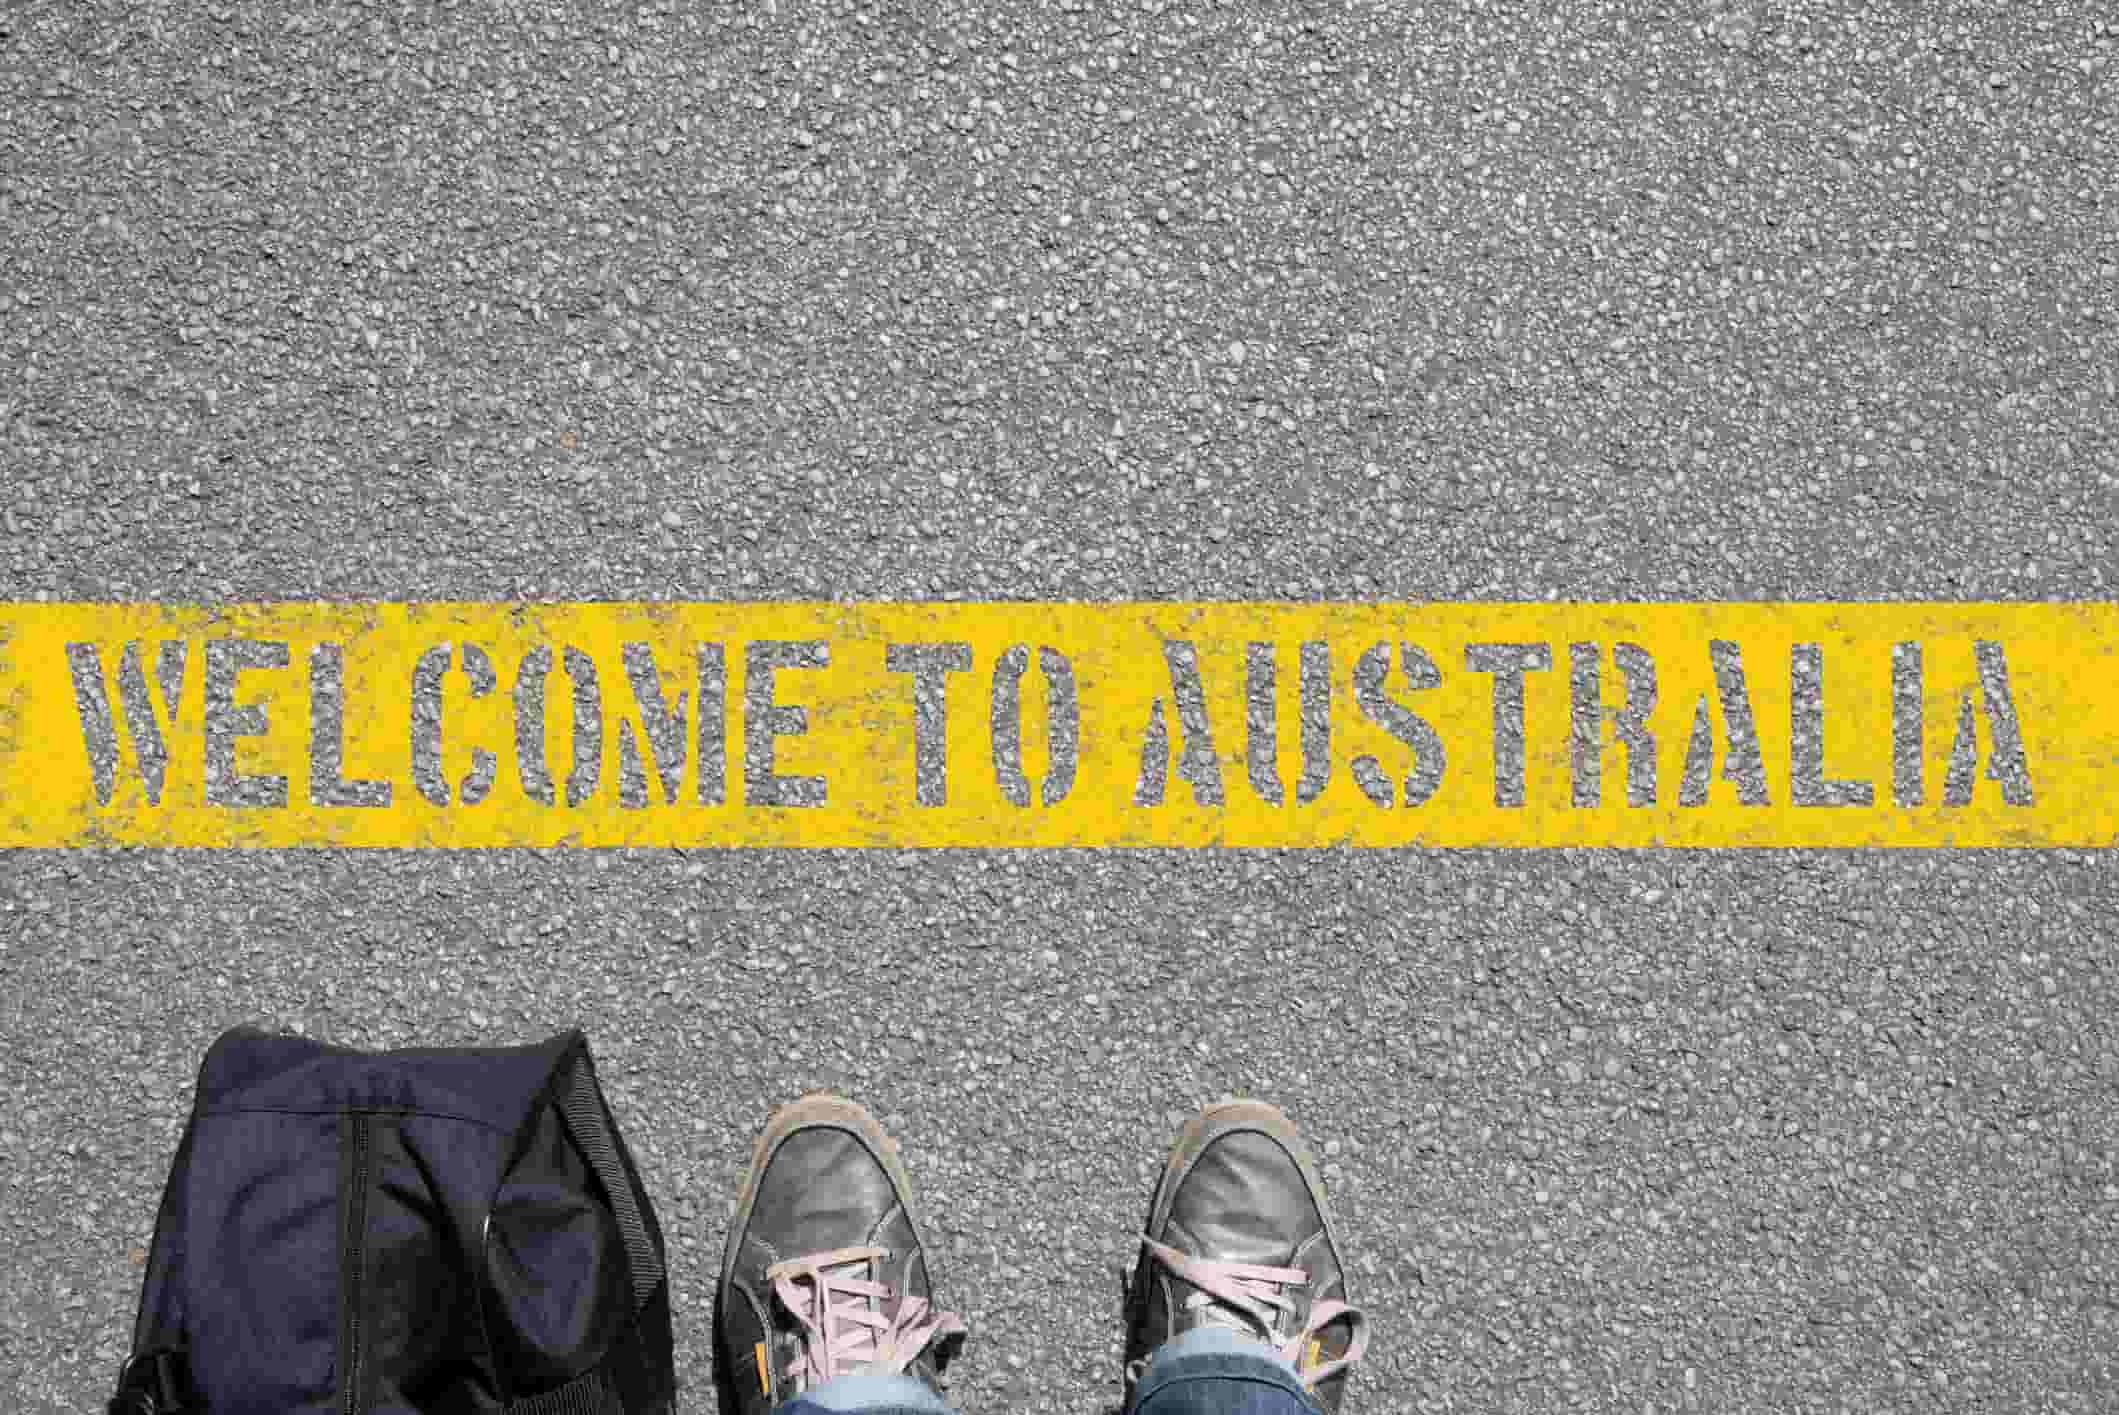 welcome to Australia sign